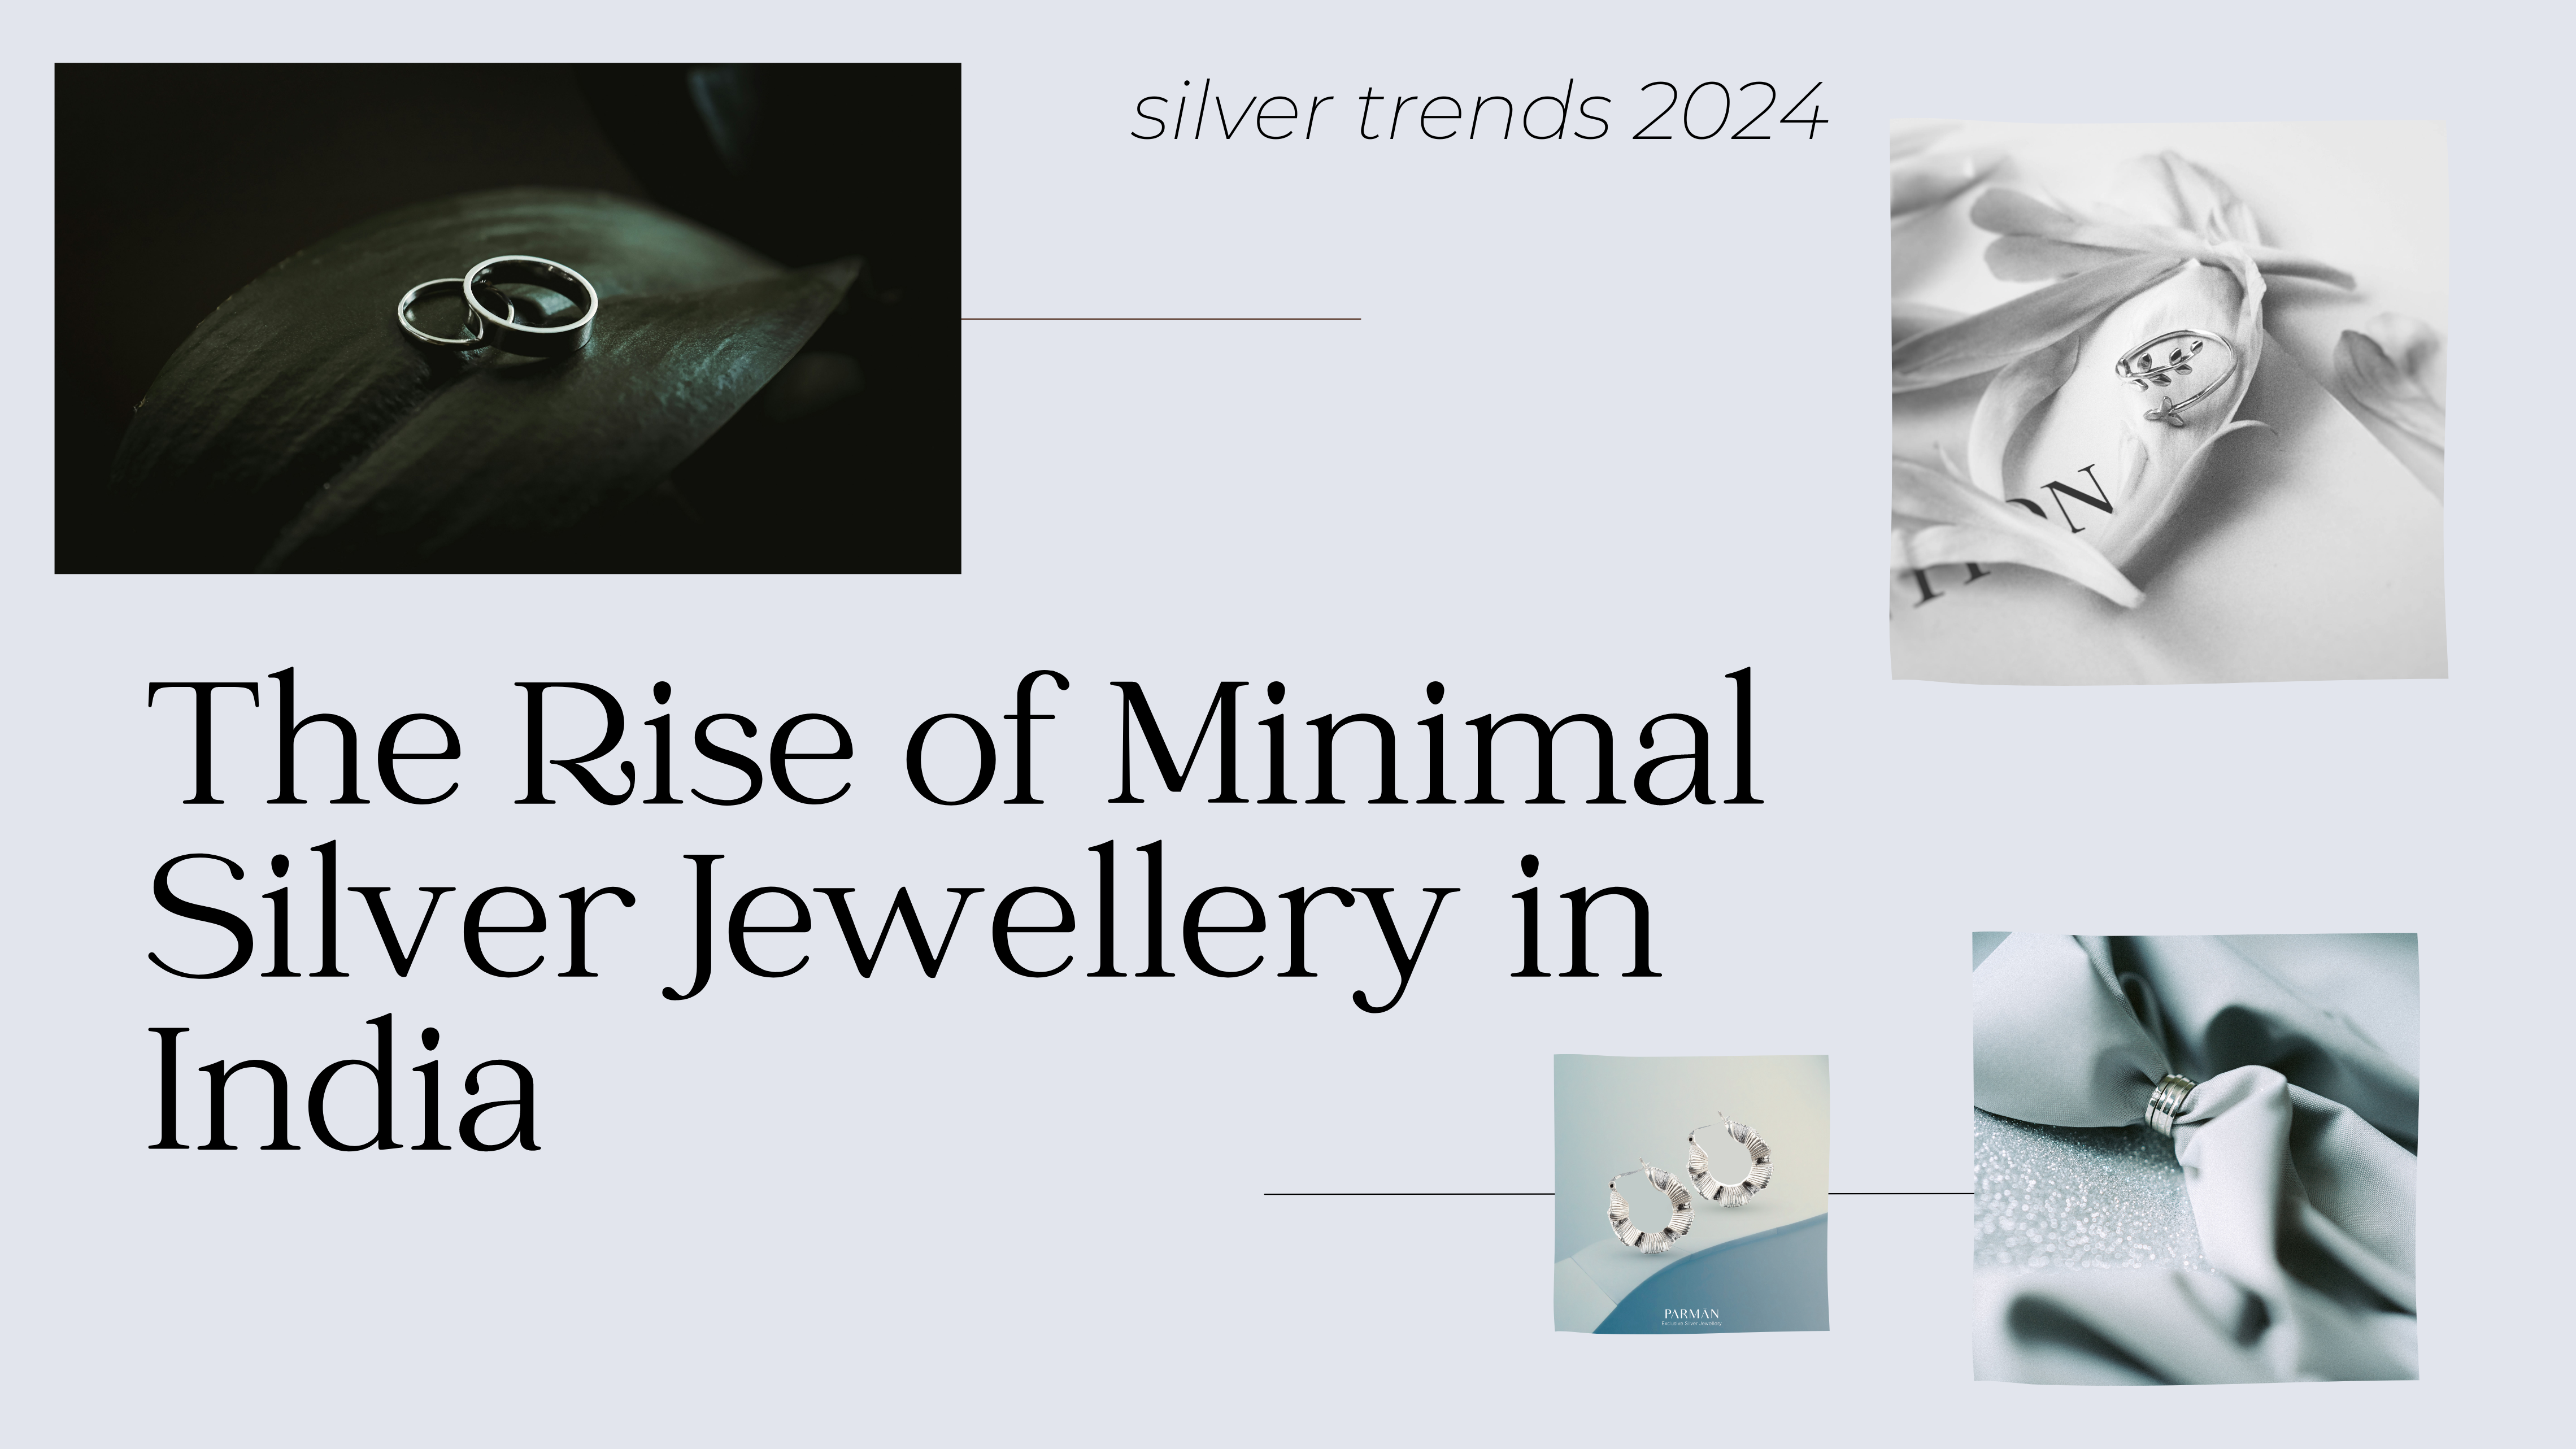 The Rise of Minimal Silver Jewellery in India